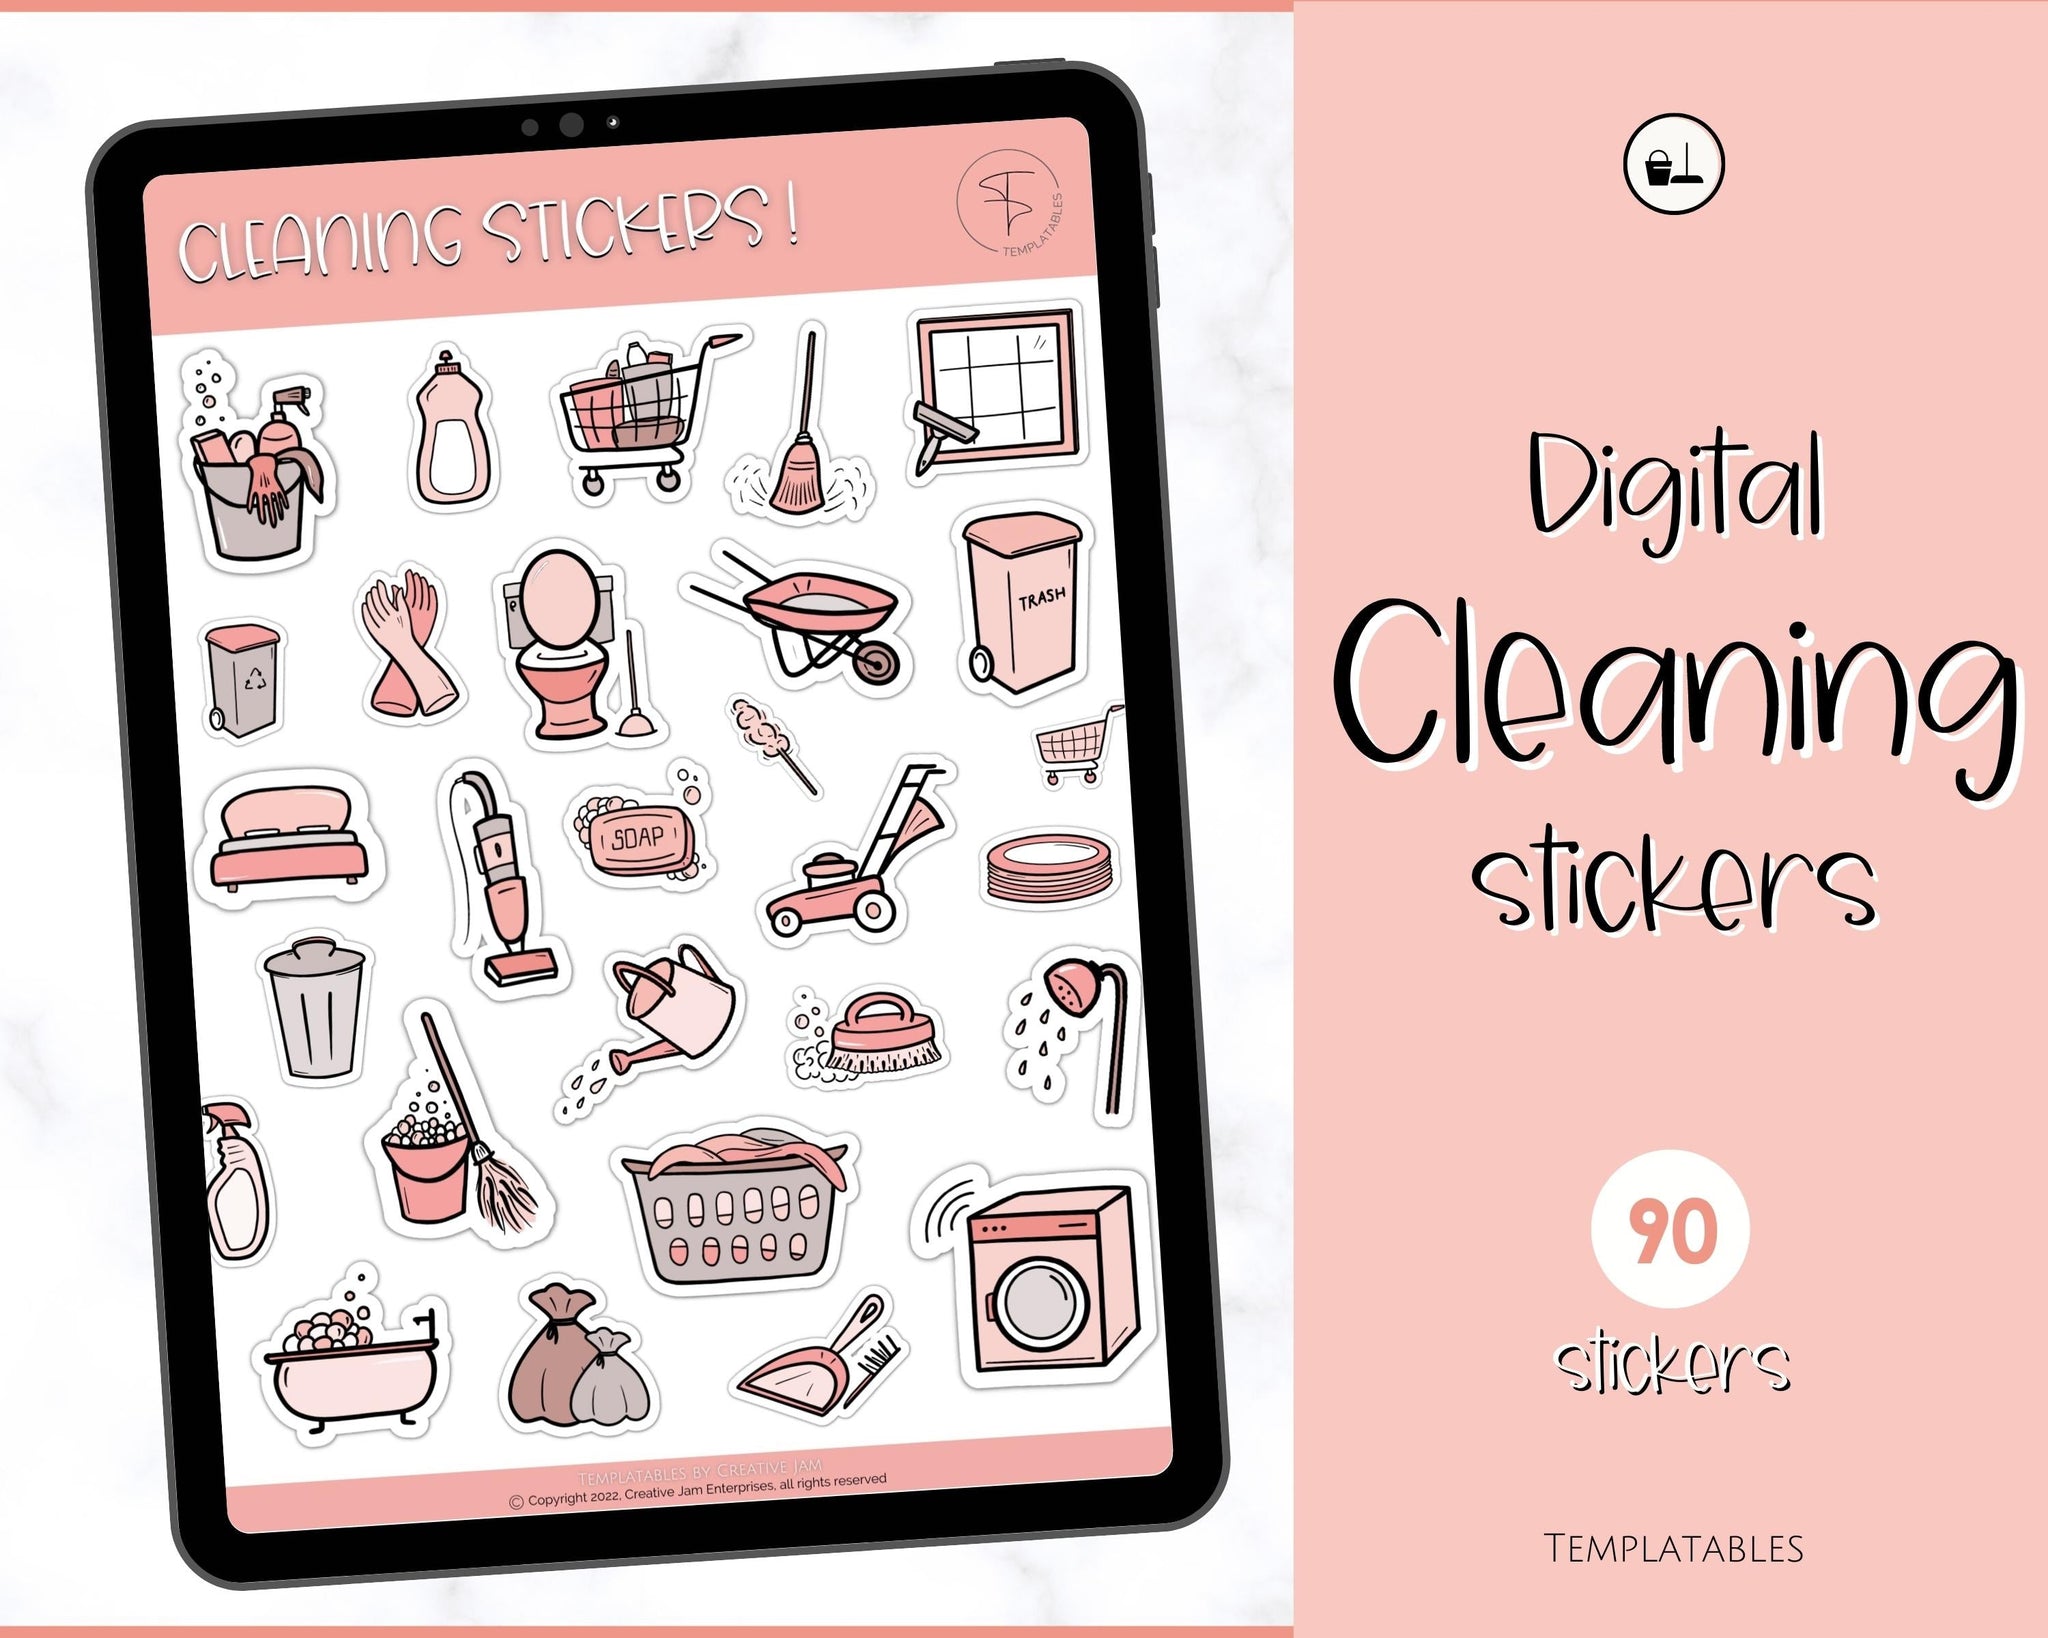 Digital Stickers Junk Journal PNG and GoodNotes 5